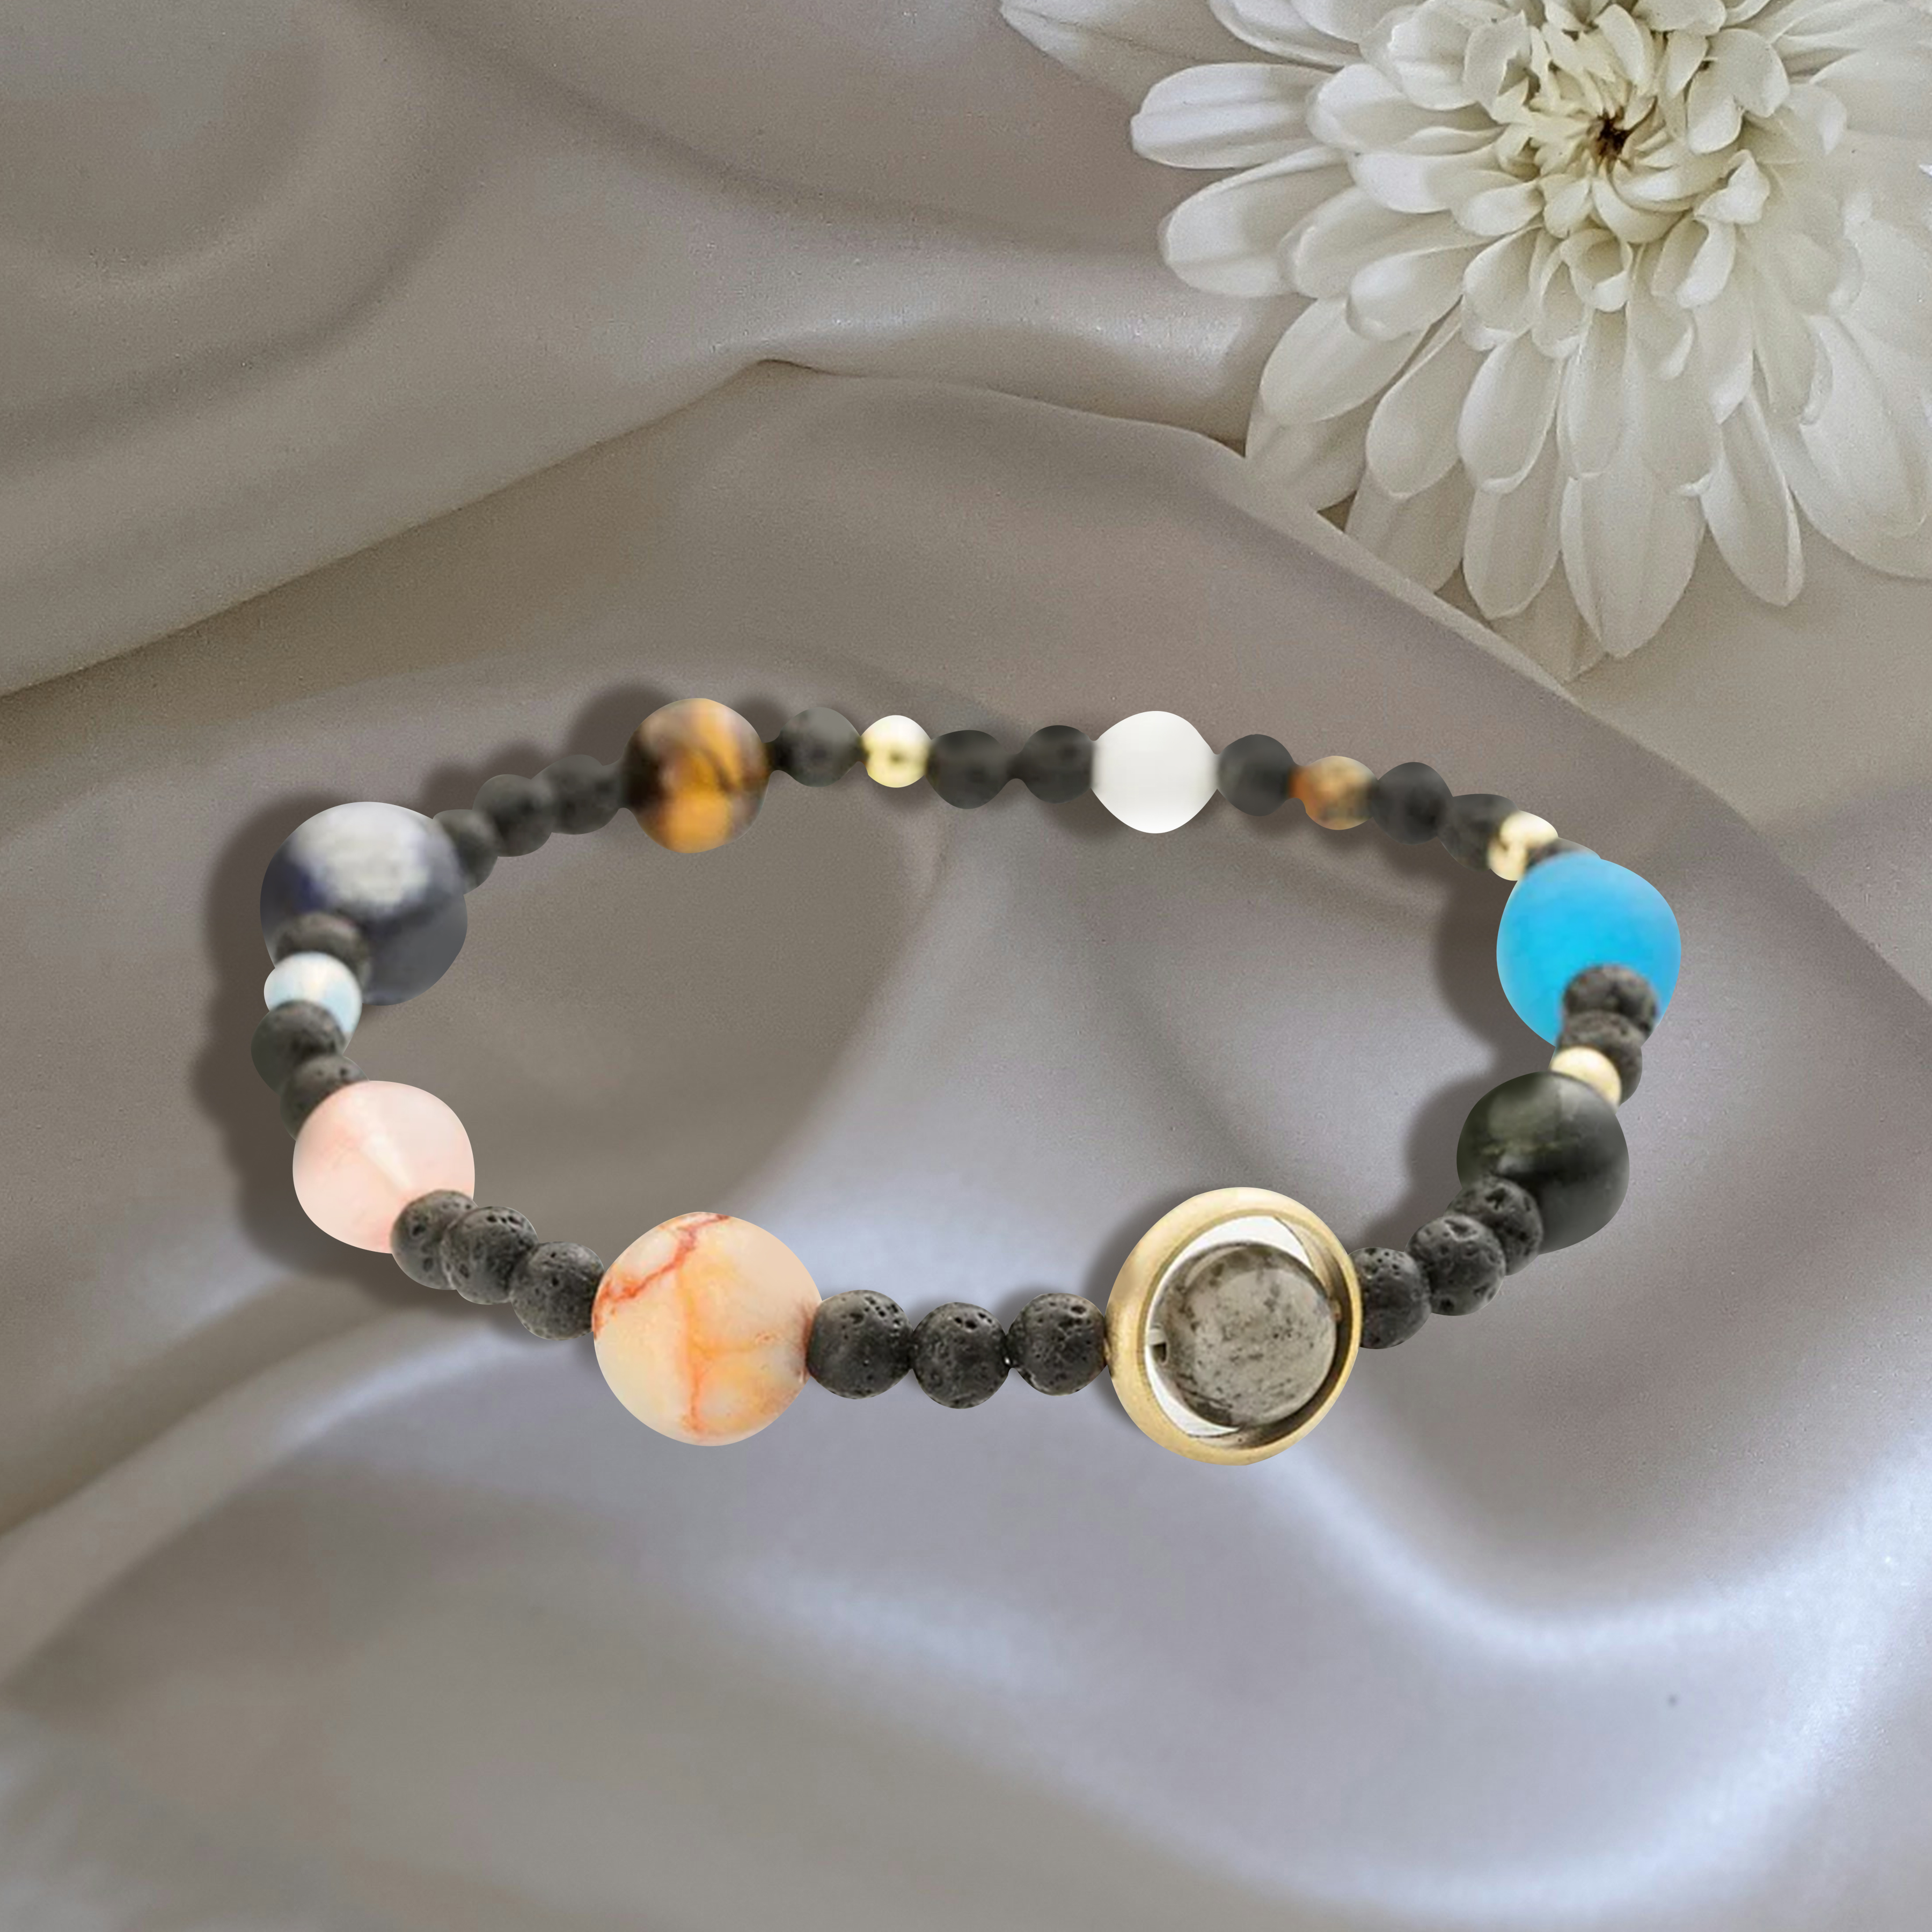 Lucklumen 9 Planets Energy Luck Health Bracelet Attracts Health and Luck